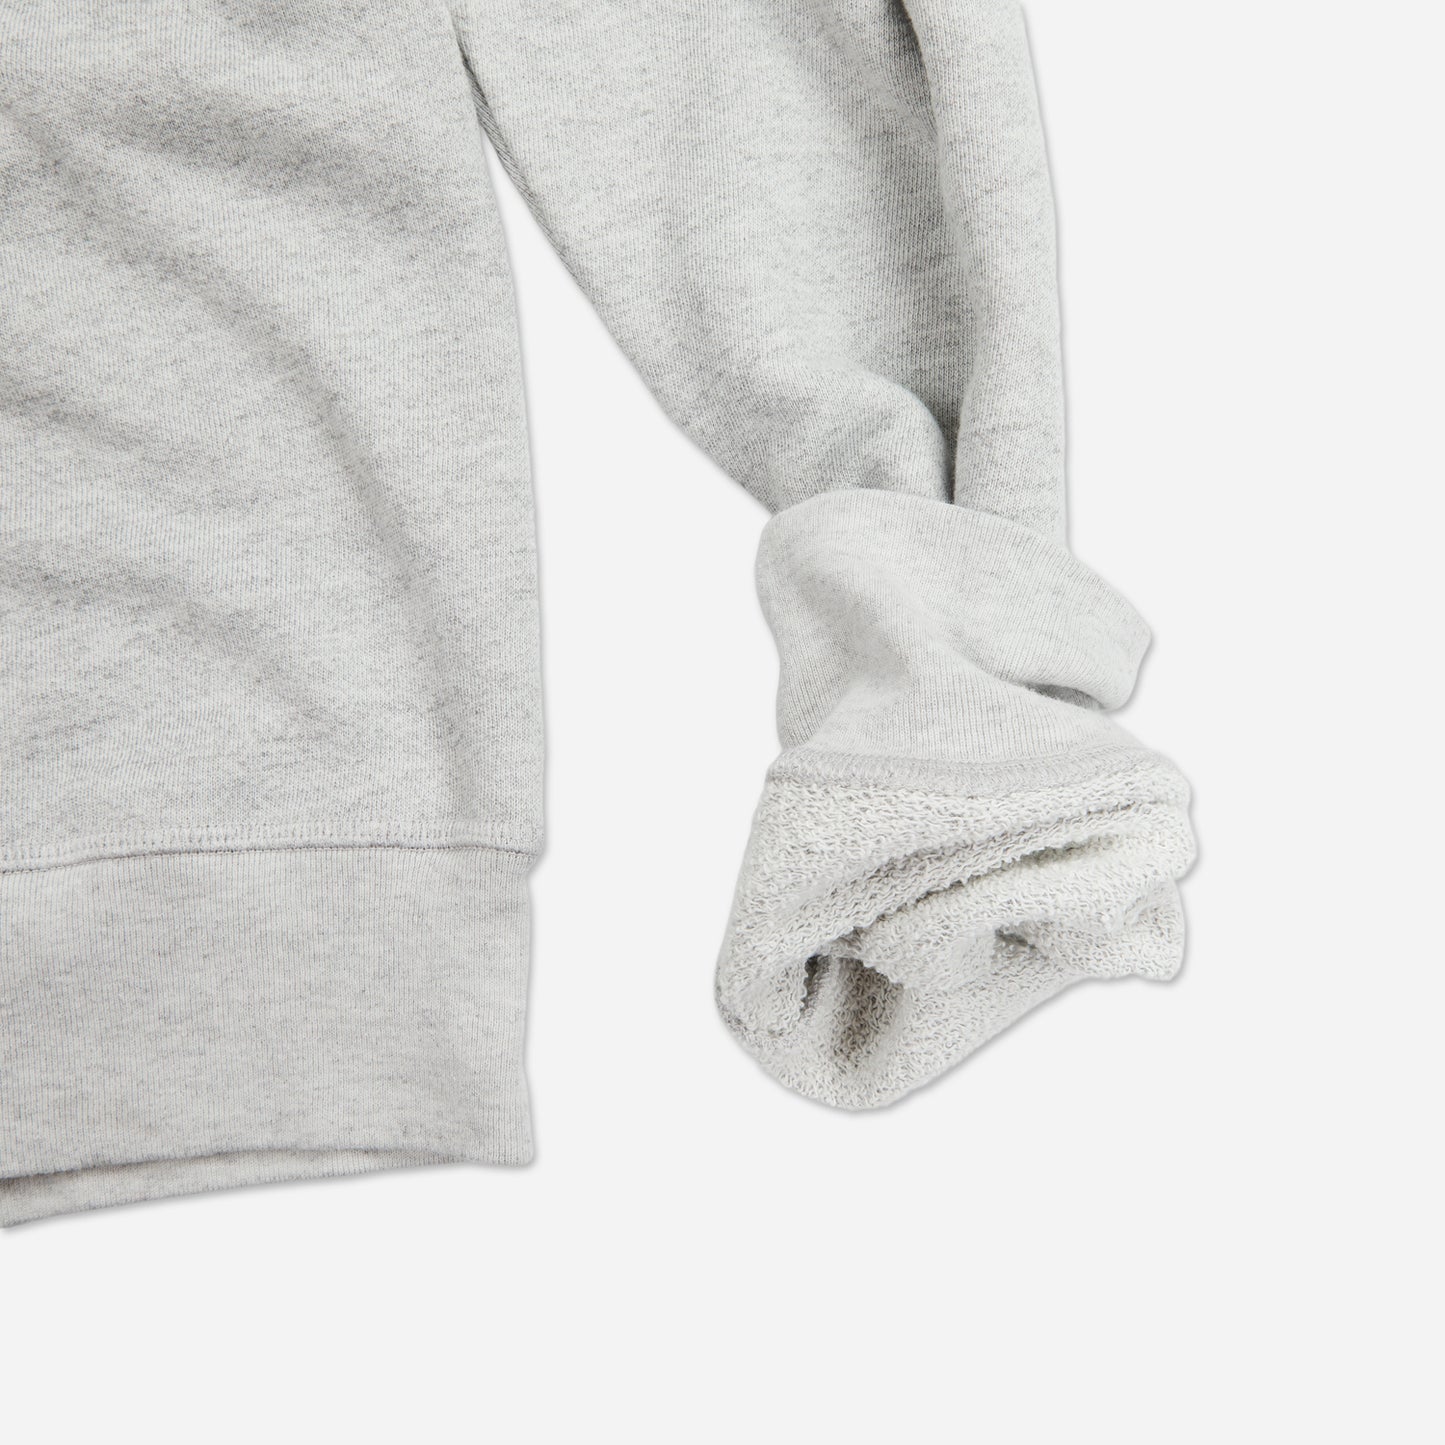 bottom right hand view of off white grey homespun french terry crew neck sweatshirt with white accent stitching with rolled up sleeve